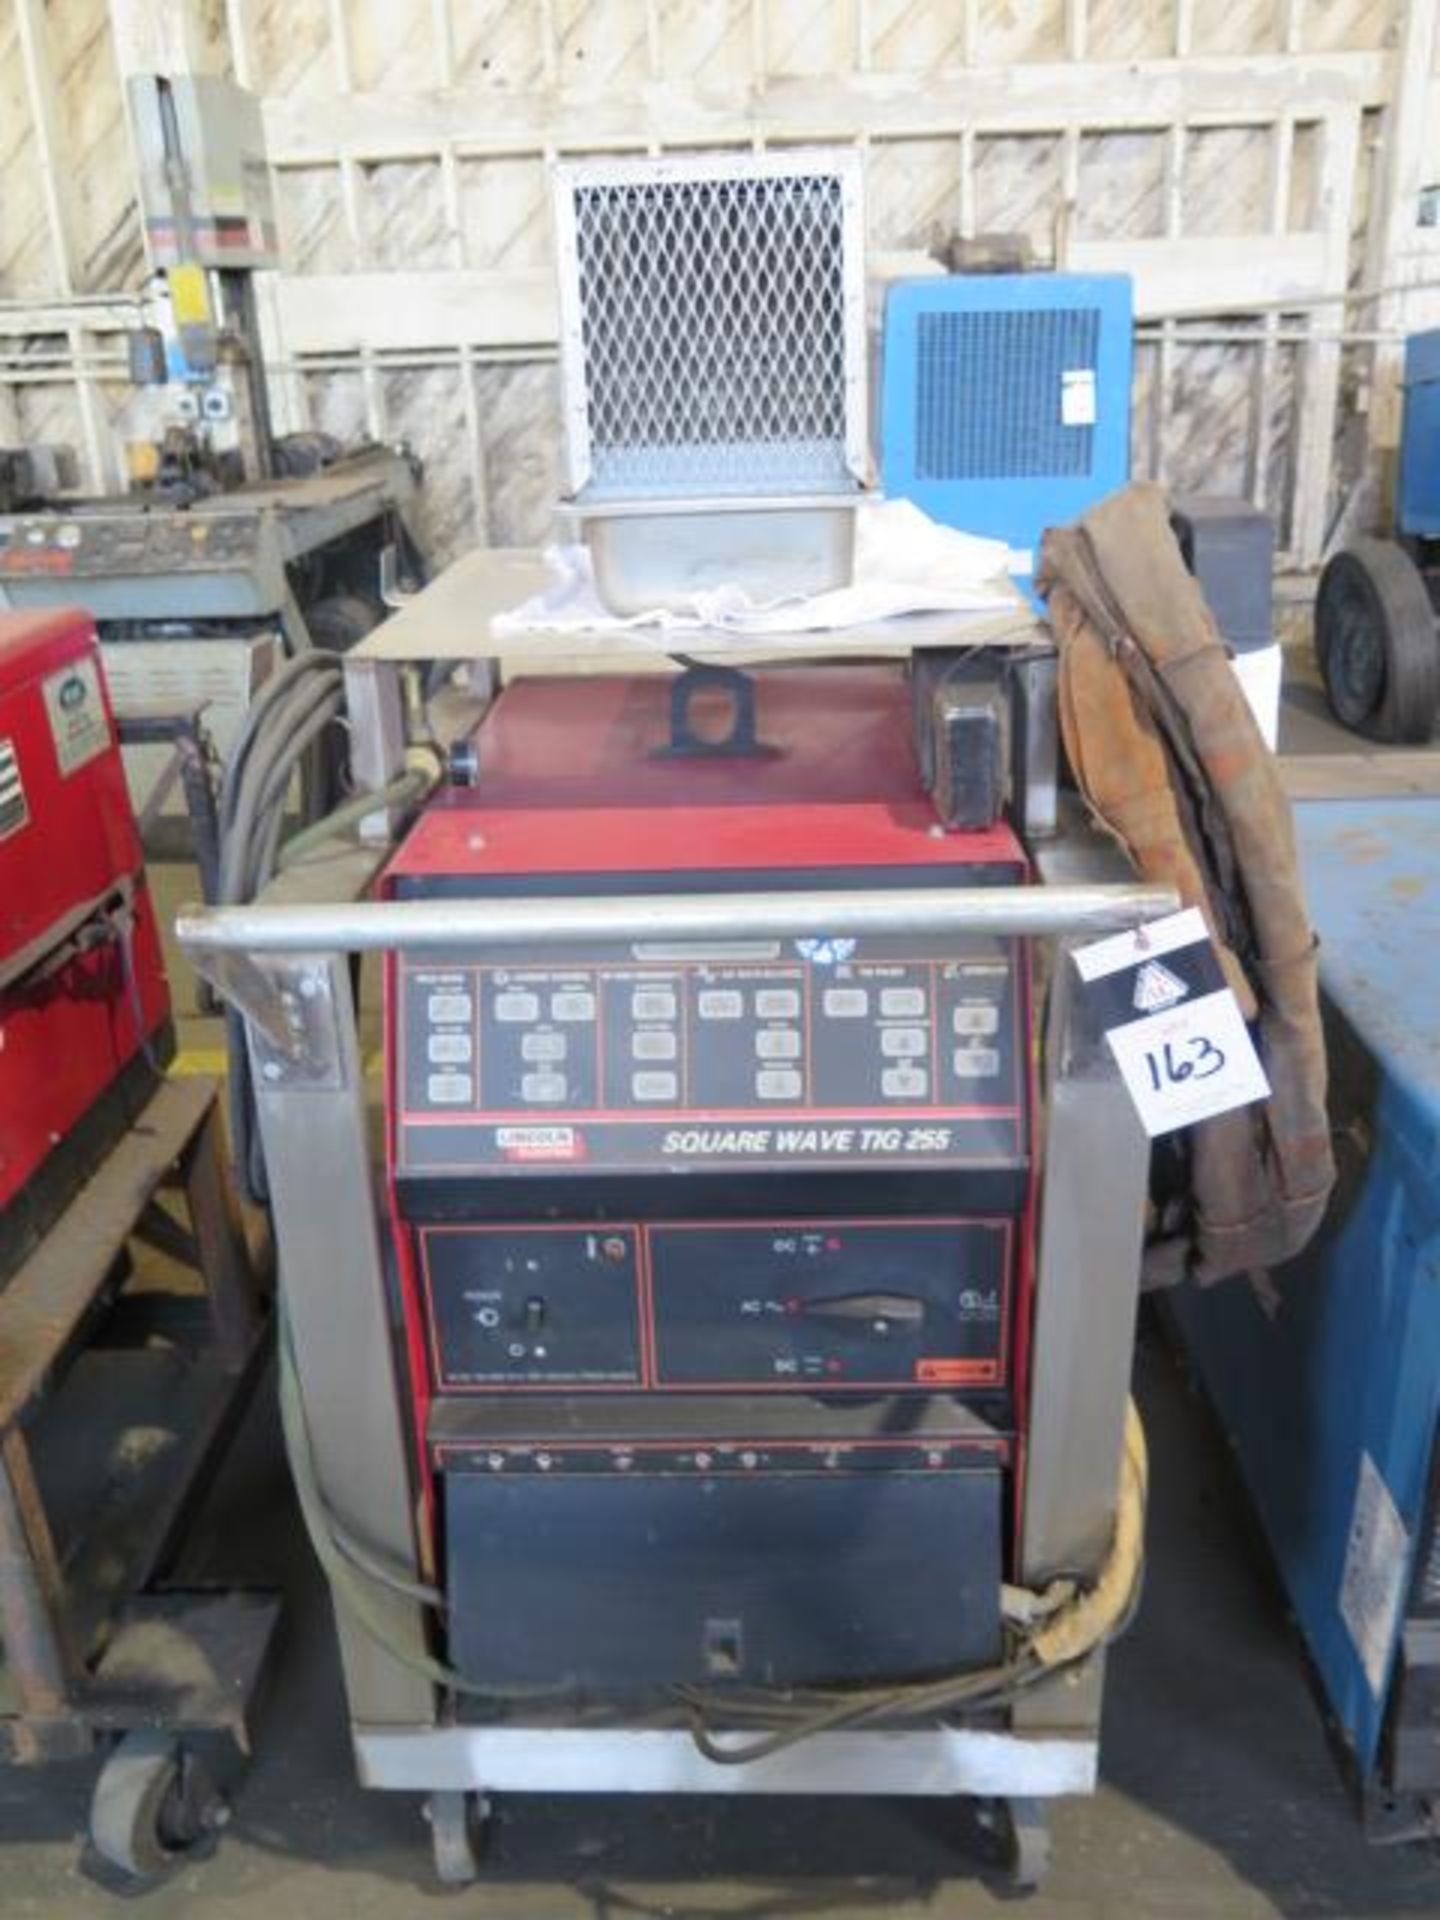 Lincoln Square Wave TIG 255 AC/DC Arc Welding Power Source w/ Cart (SOLD AS-IS - NO WARRANTY)